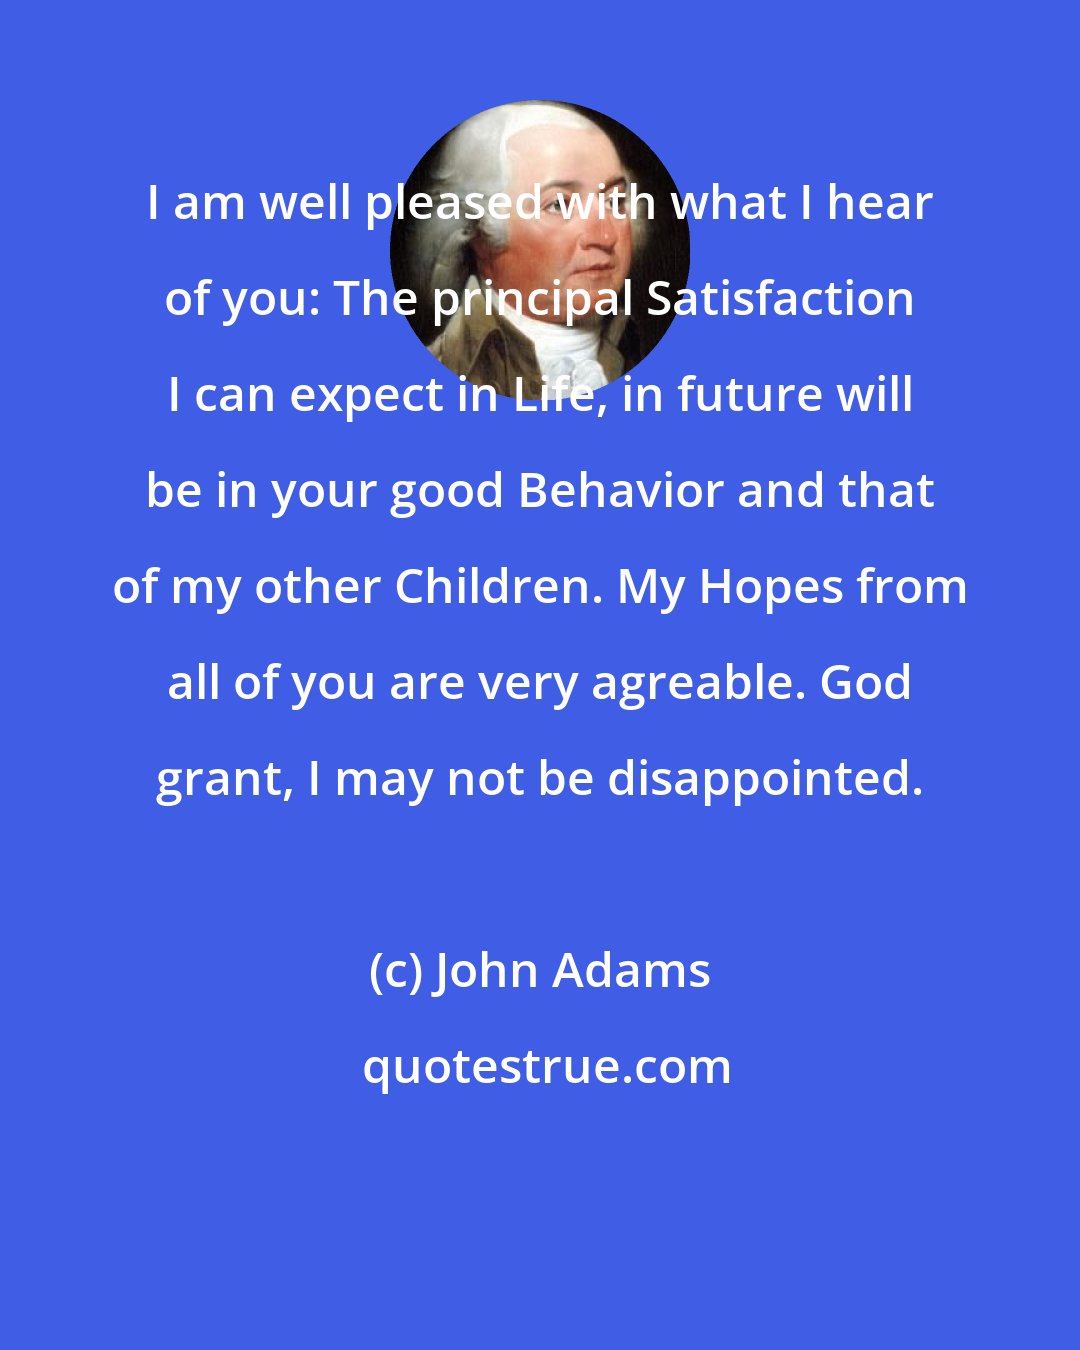 John Adams: I am well pleased with what I hear of you: The principal Satisfaction I can expect in Life, in future will be in your good Behavior and that of my other Children. My Hopes from all of you are very agreable. God grant, I may not be disappointed.